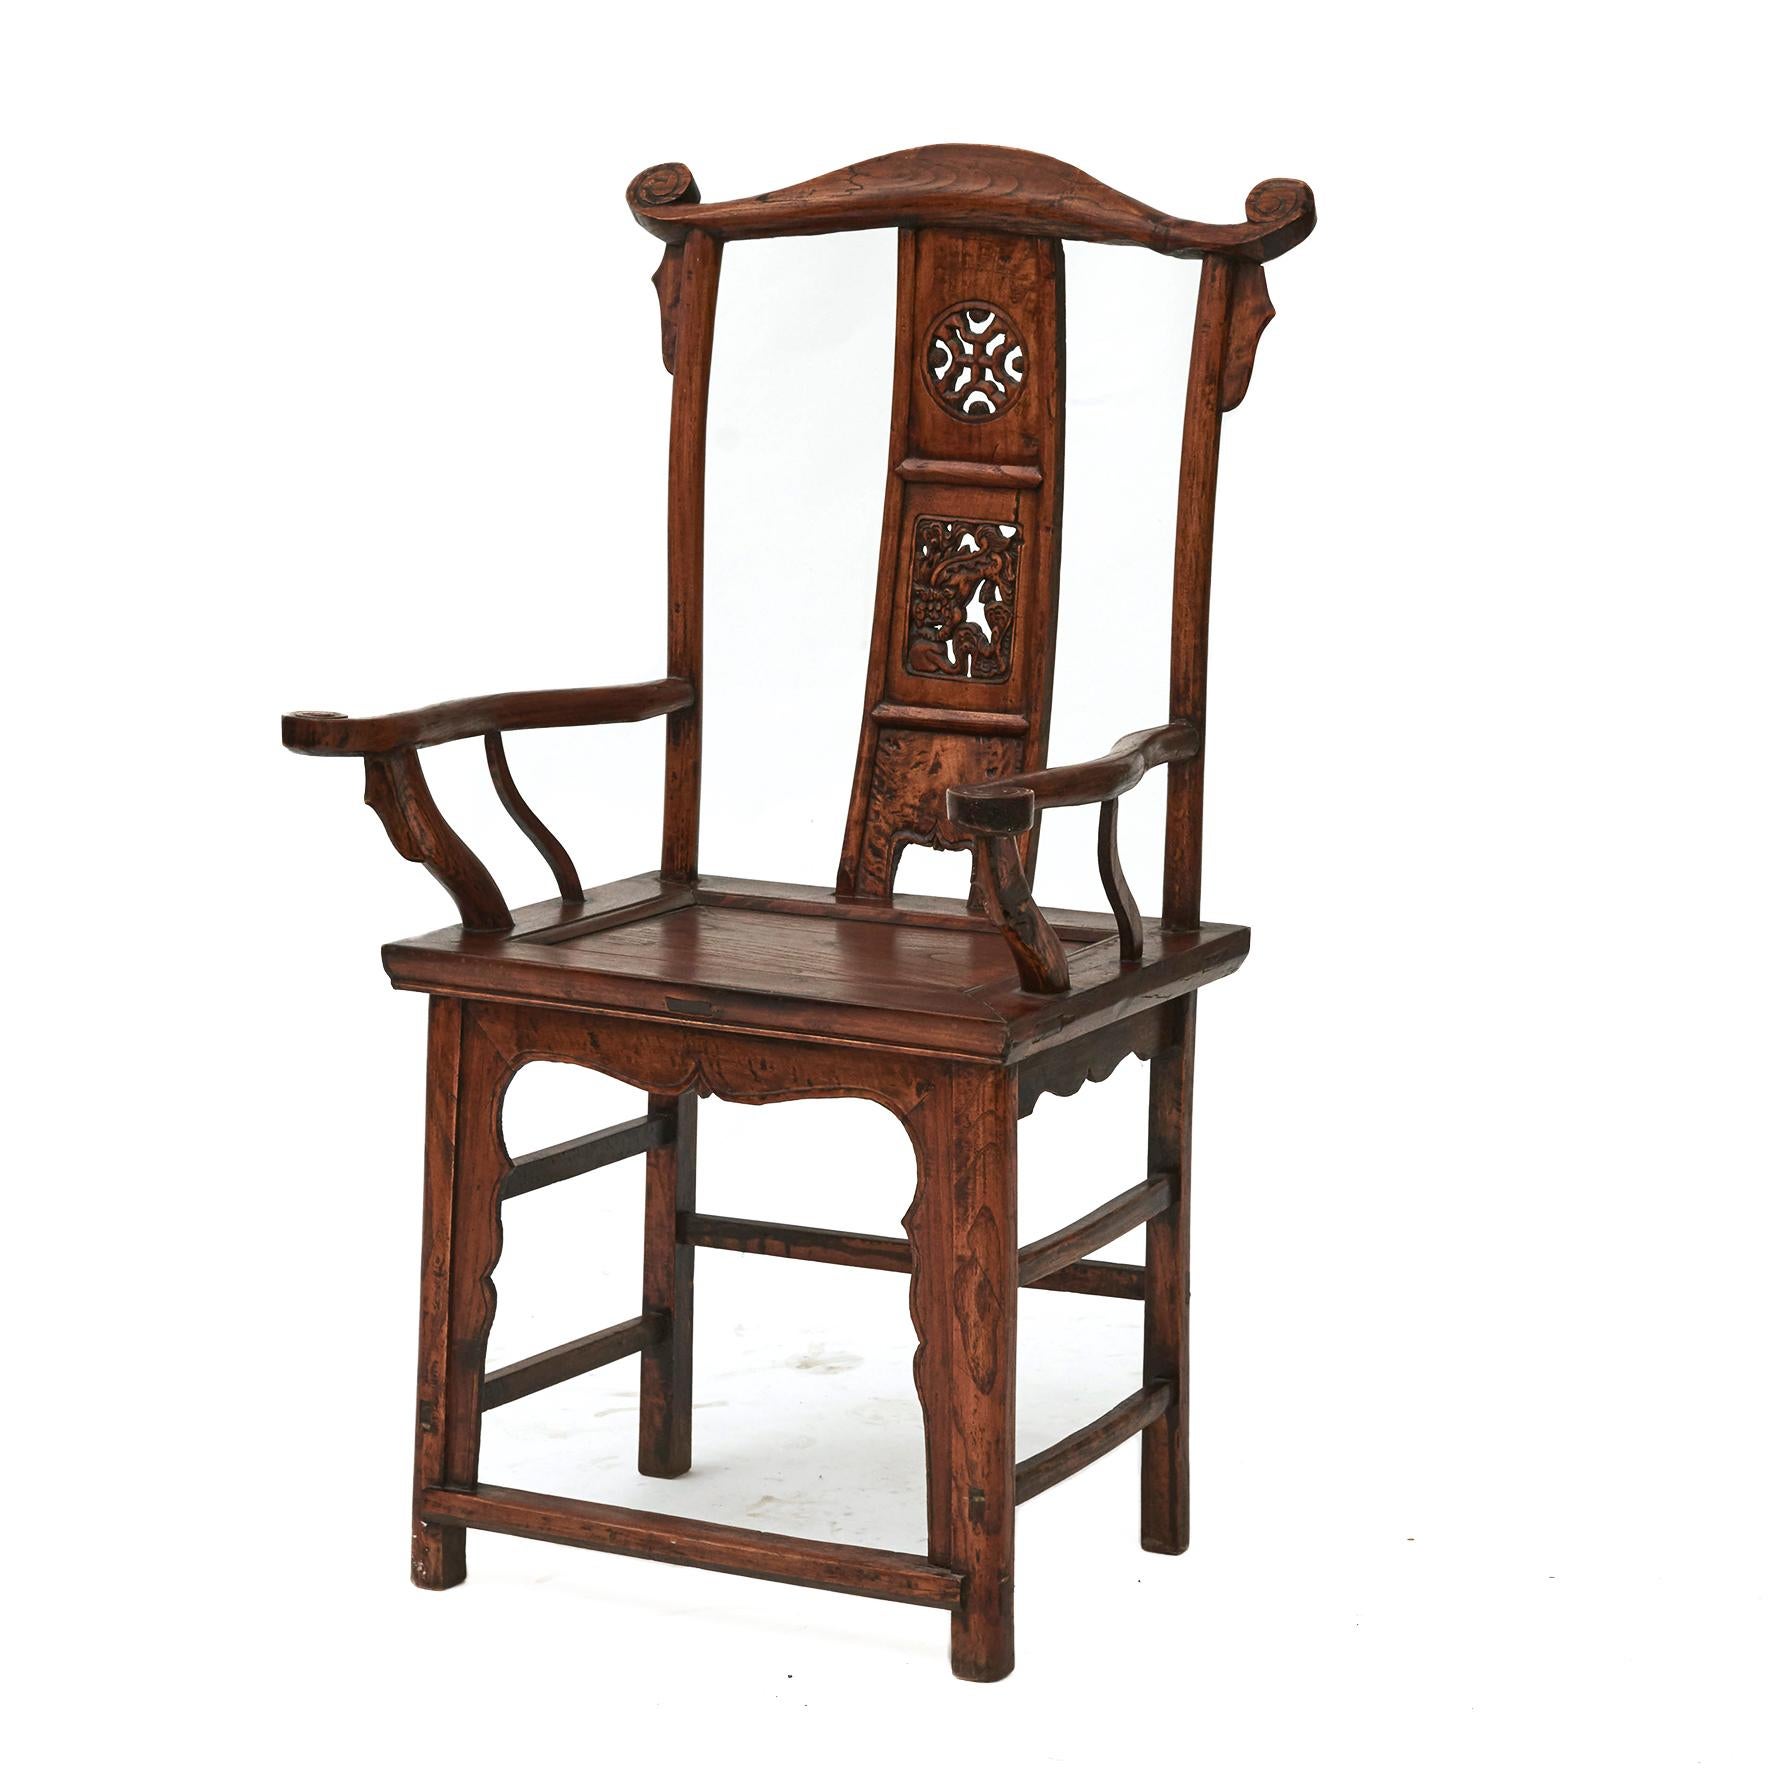 Pair of Chinese yoke back official's hat chairs in ming style.
Created in elm wood in the 19th century each chair features intricate carvings of traditional Chinese motifs on the back splat, including a Foo dog. 
From Shanxi Province,